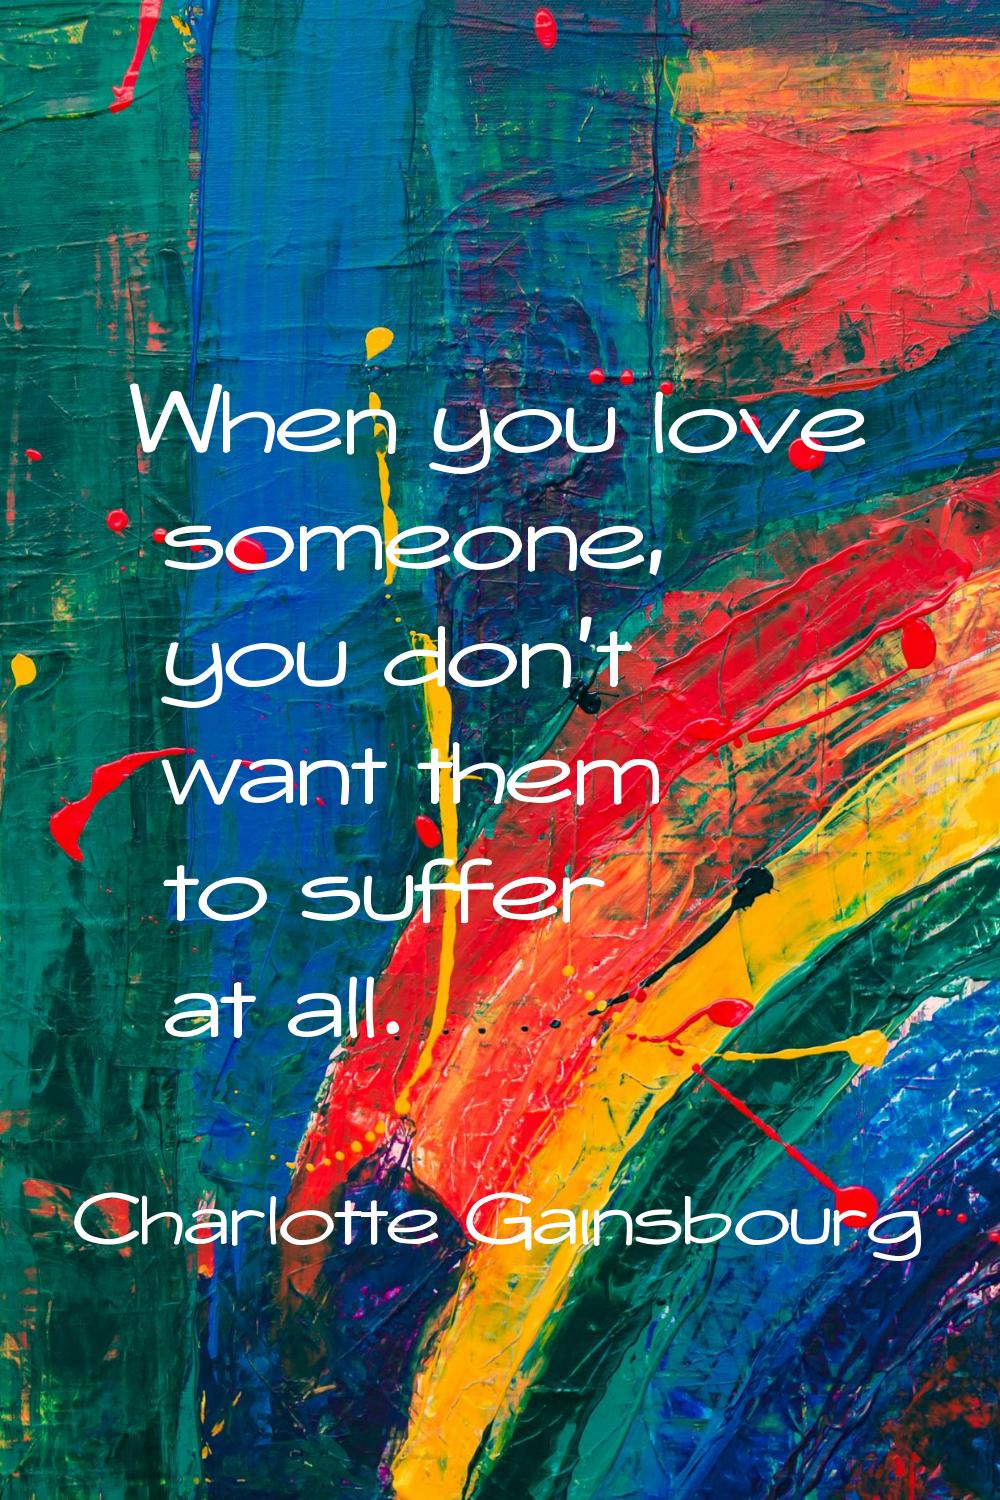 When you love someone, you don't want them to suffer at all.